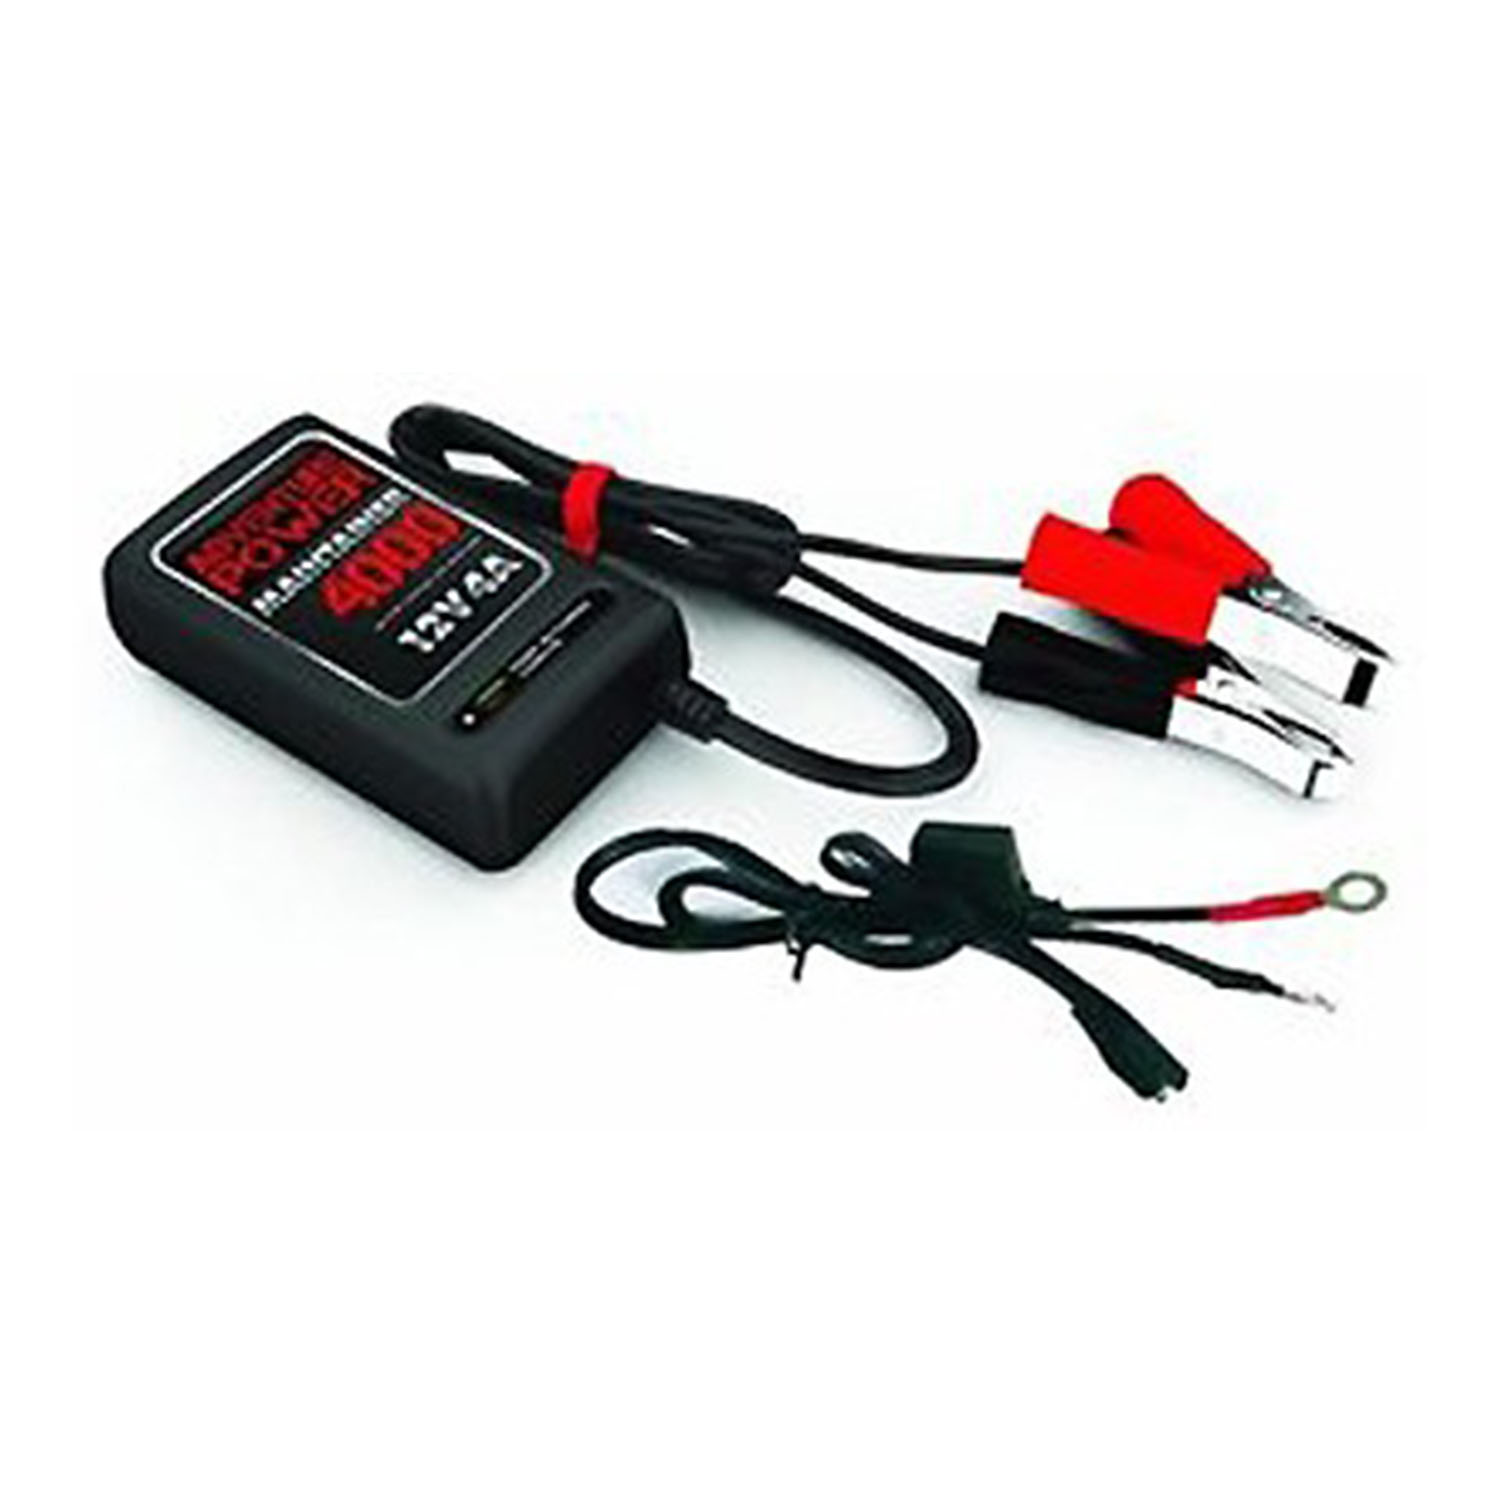 12V 4 AMP BATTERY CHARGER  MAINTAINER for MOTORCYCLE BATTERY